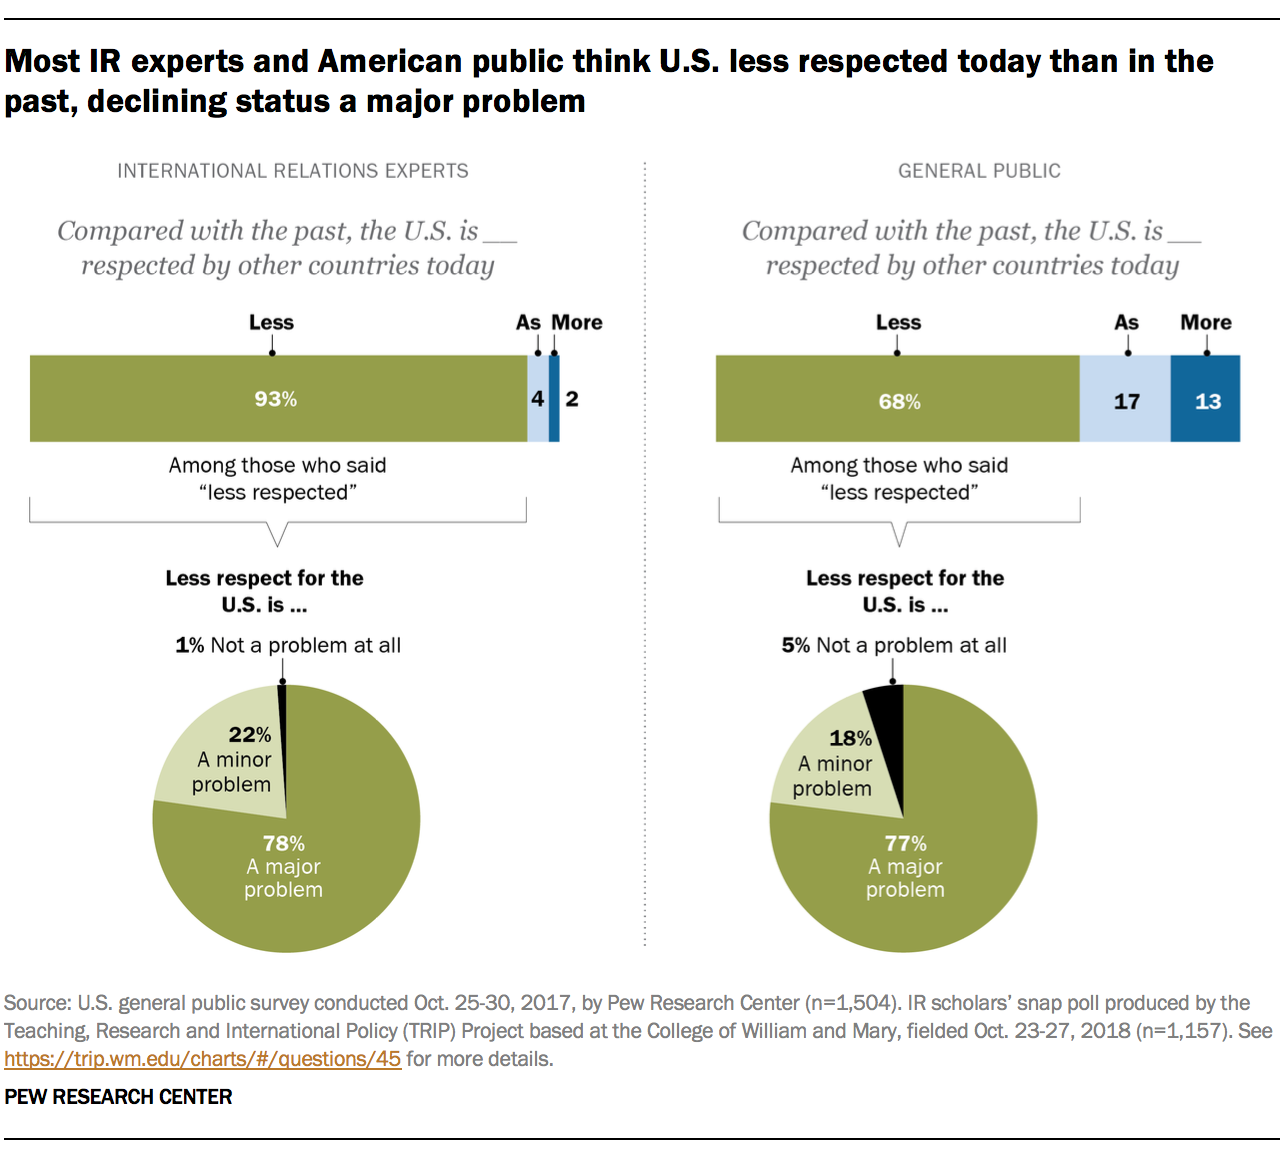 Most IR experts and American public think U.S. less respected today than in the past, declining status a major problem